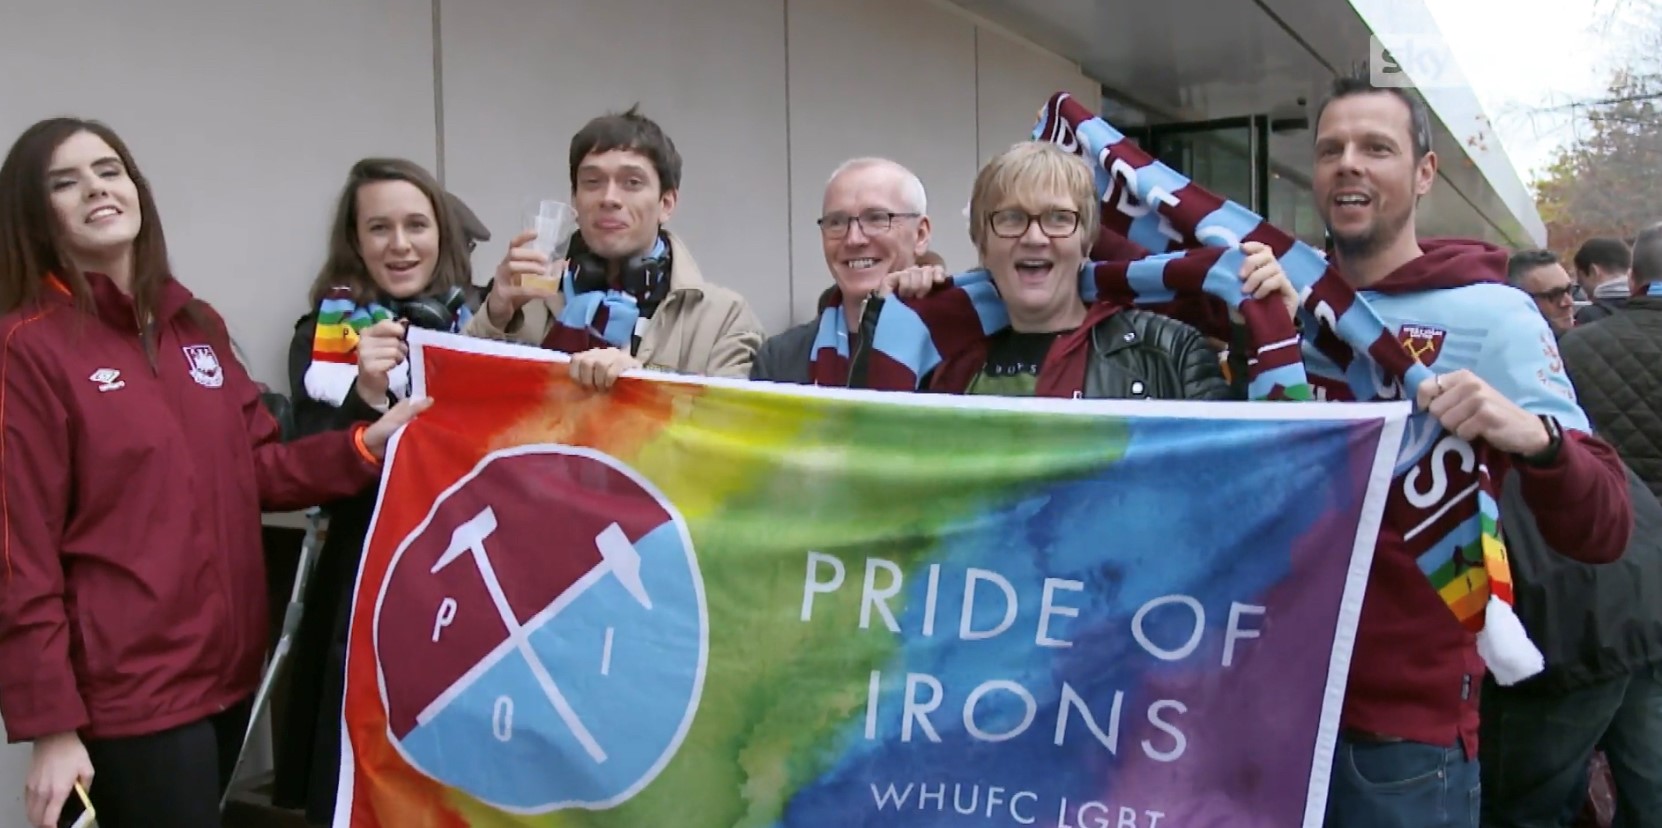 Pride of Irons – more than just a supporters’ group